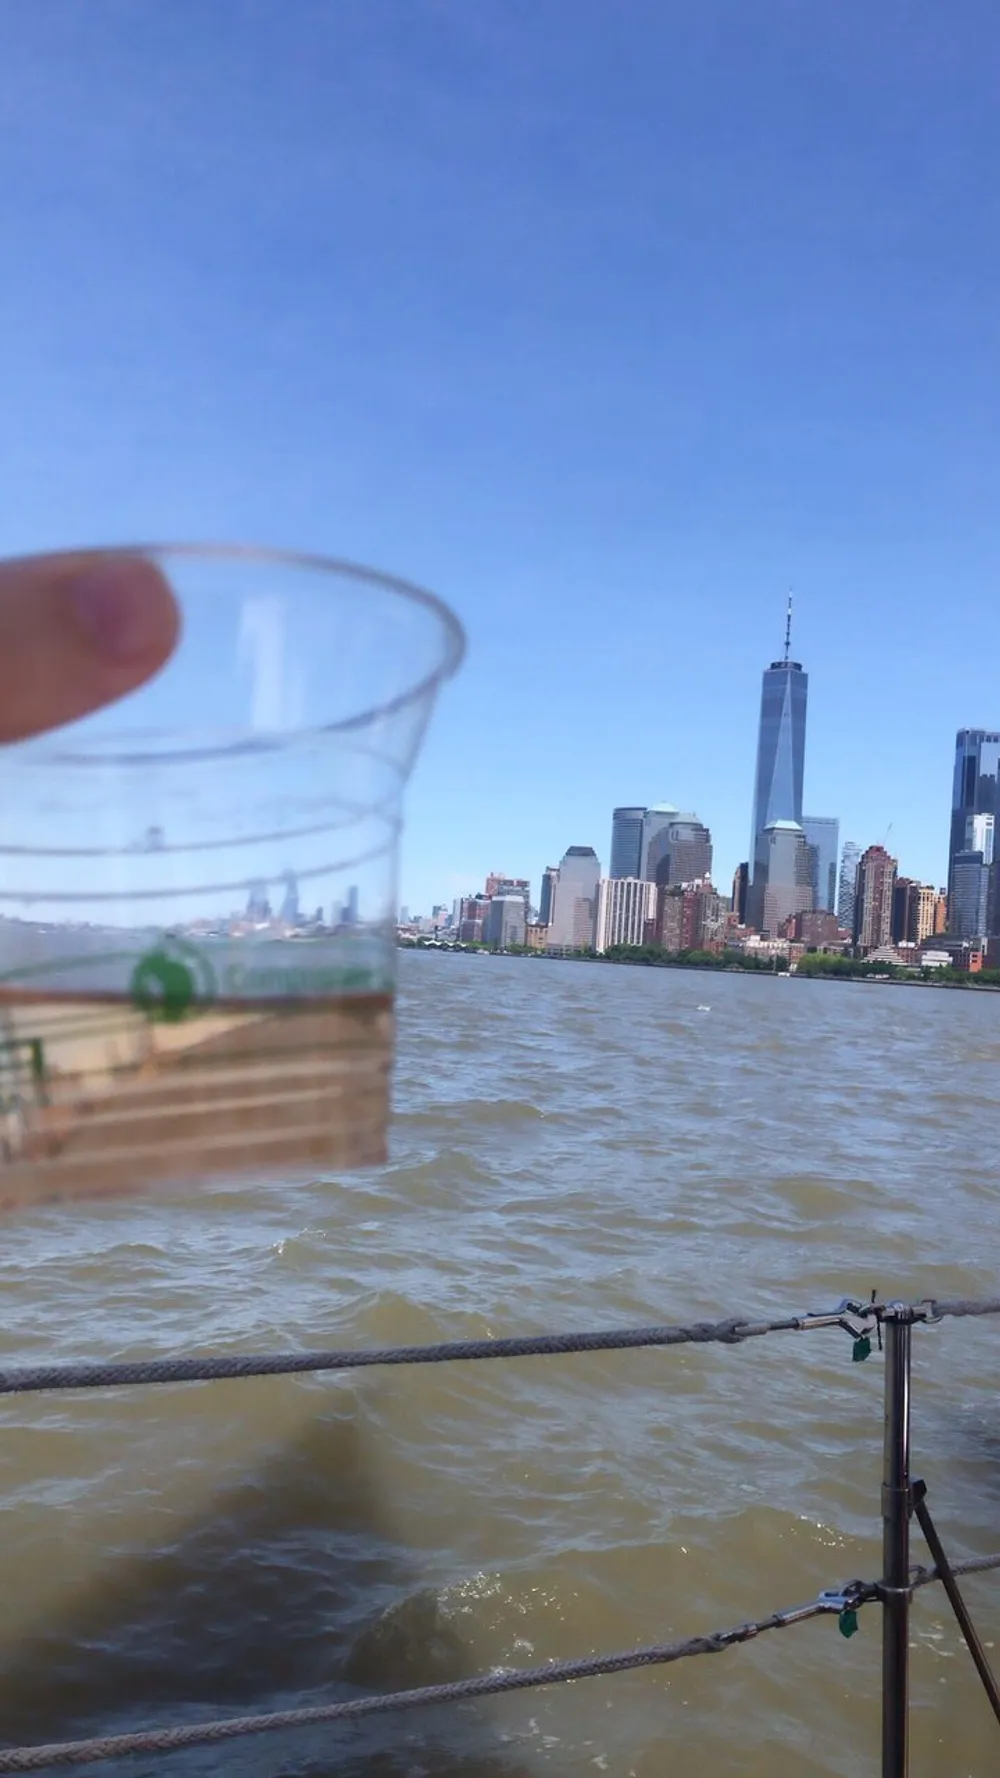 A person holds up a transparent plastic cup partially filled with water against a backdrop of the New York City skyline creating an illusion where the buildings seem to be inside the cup